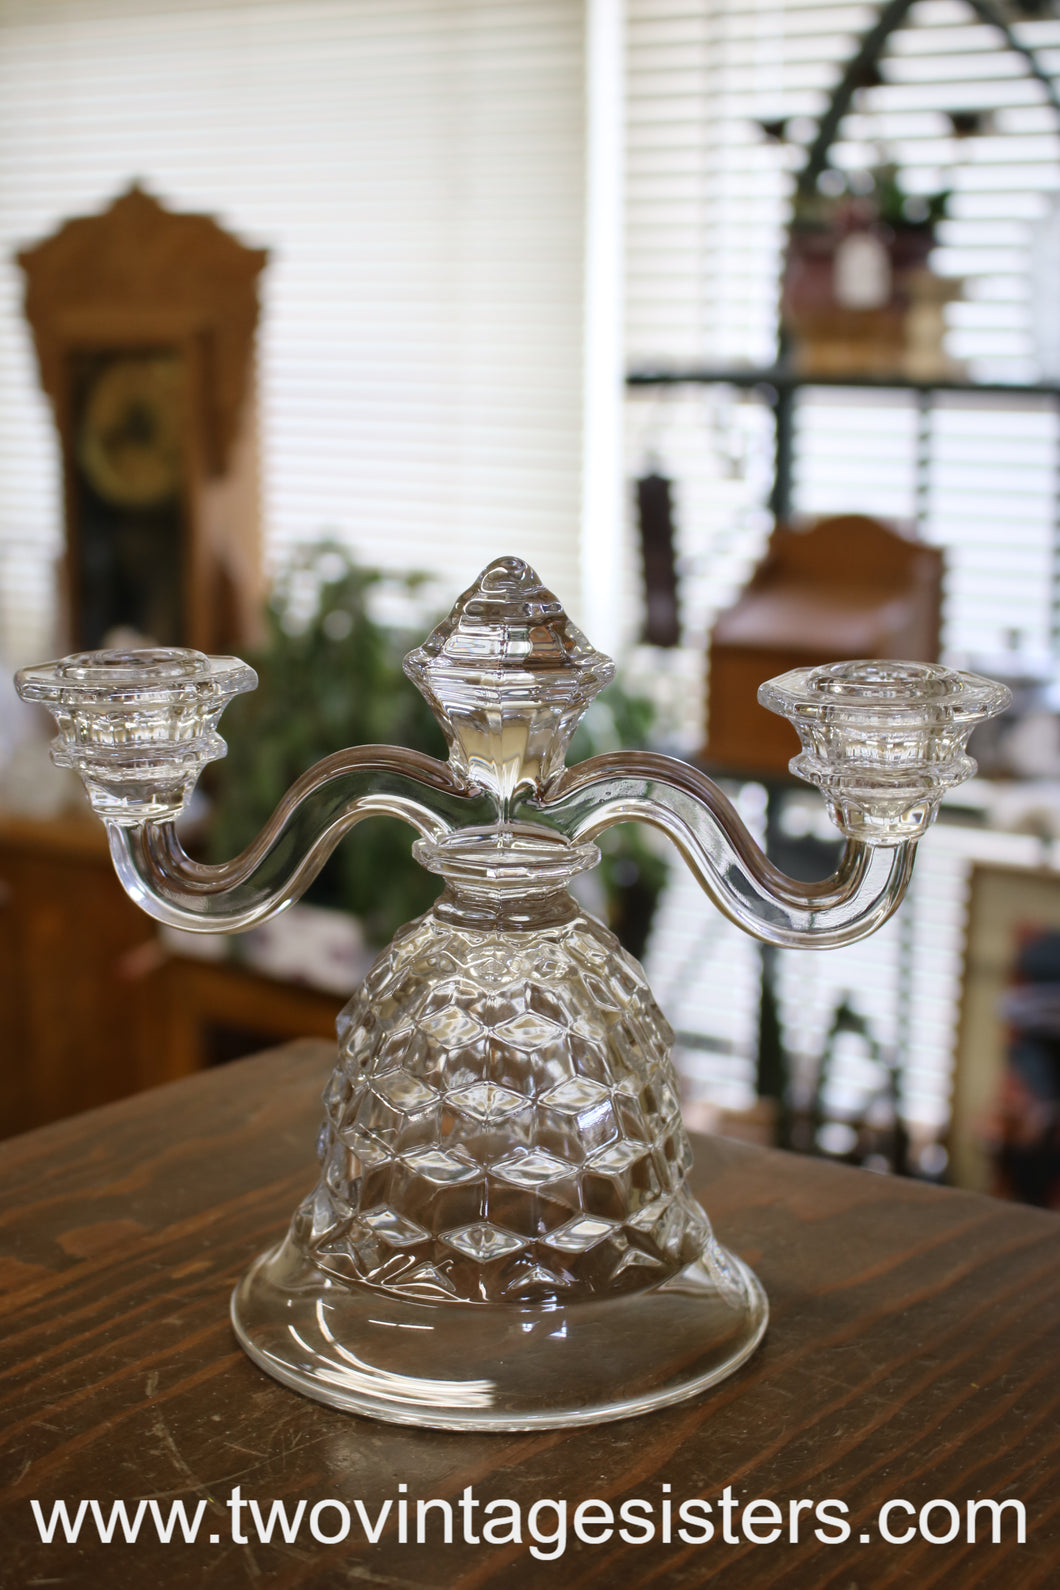 American Fostoria Lidded Double Candle Holder